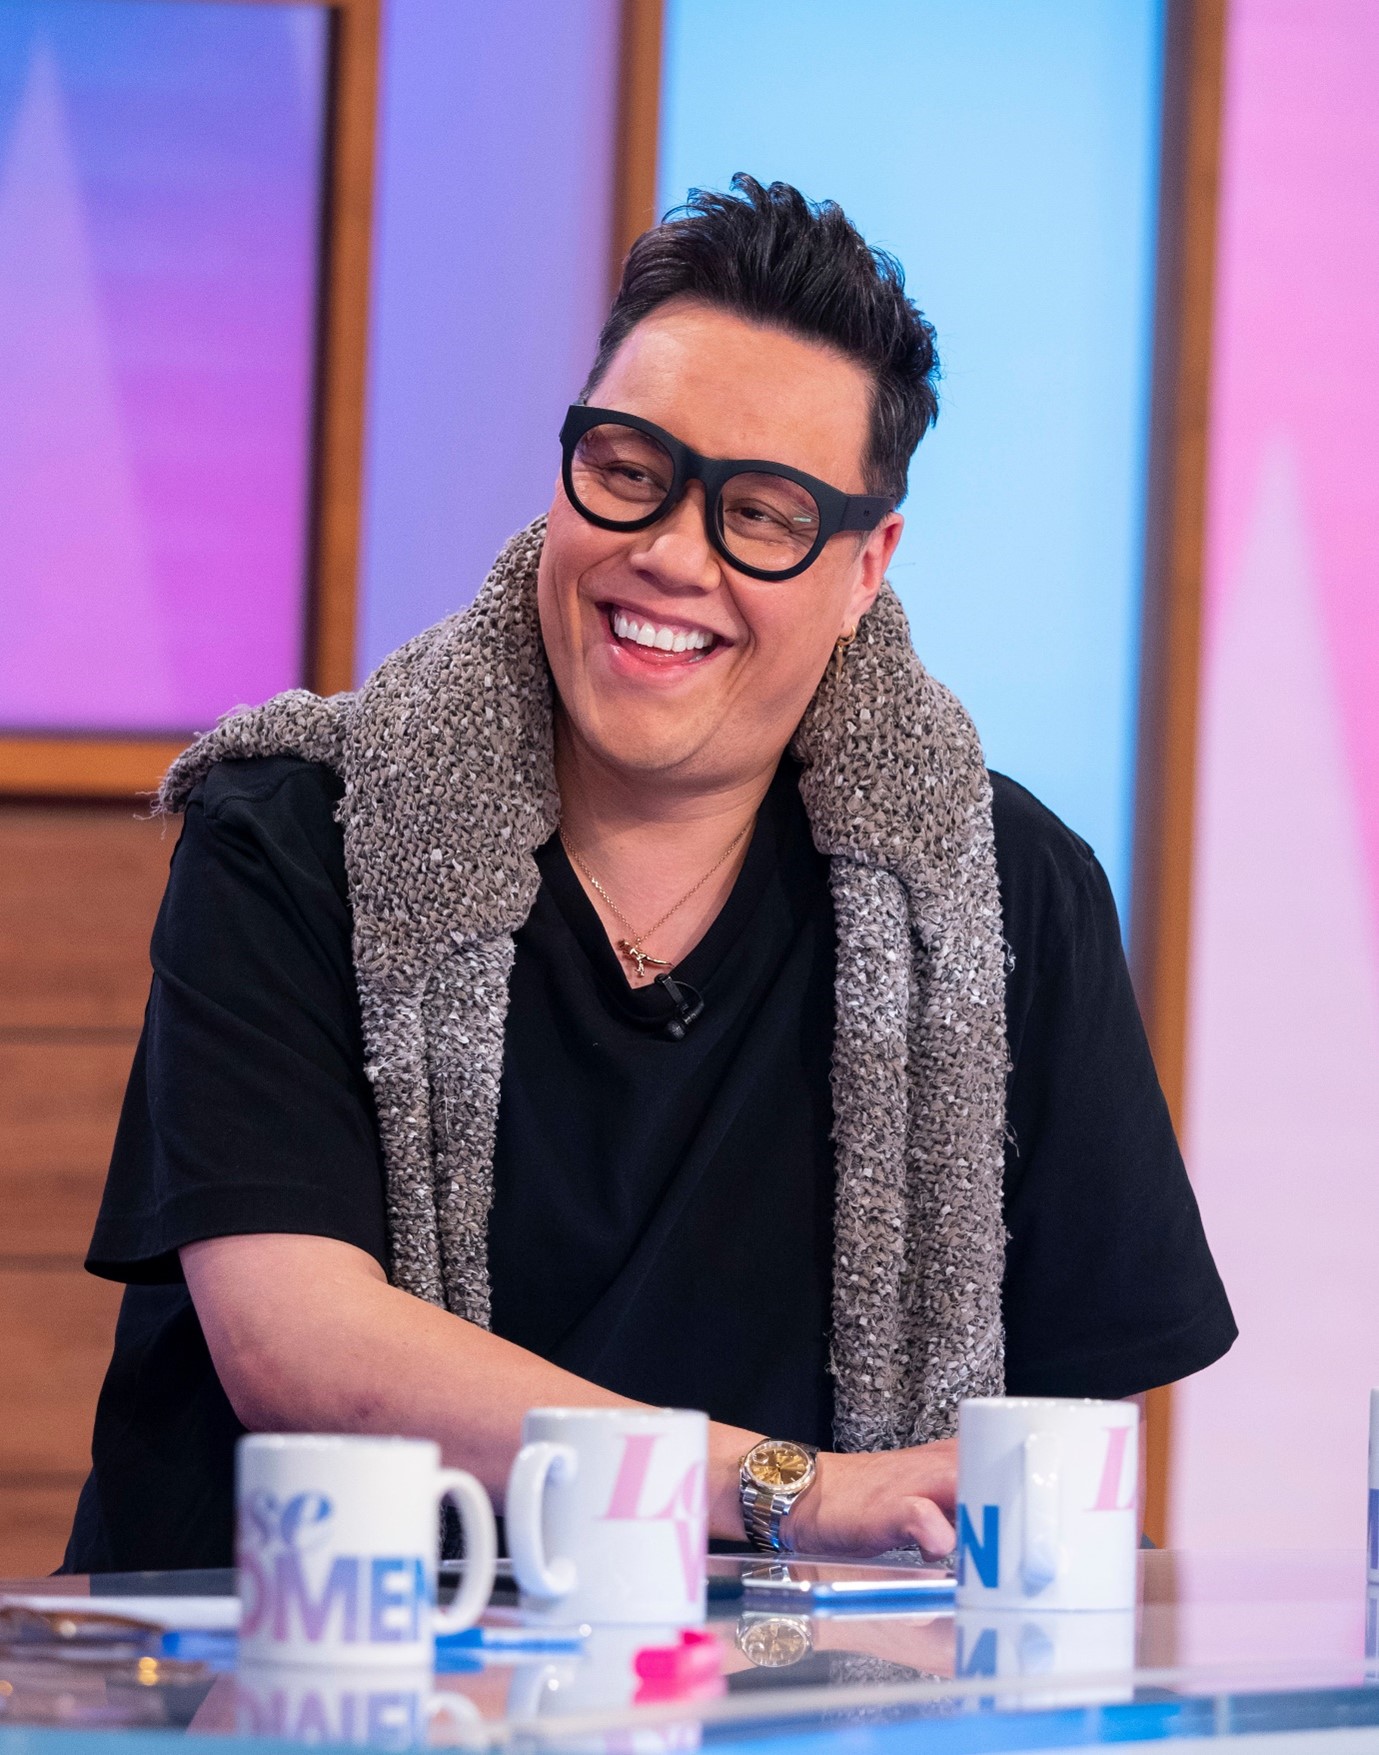 Gok Wan Husband: The stylist gives his fashion tips on Loose Women.